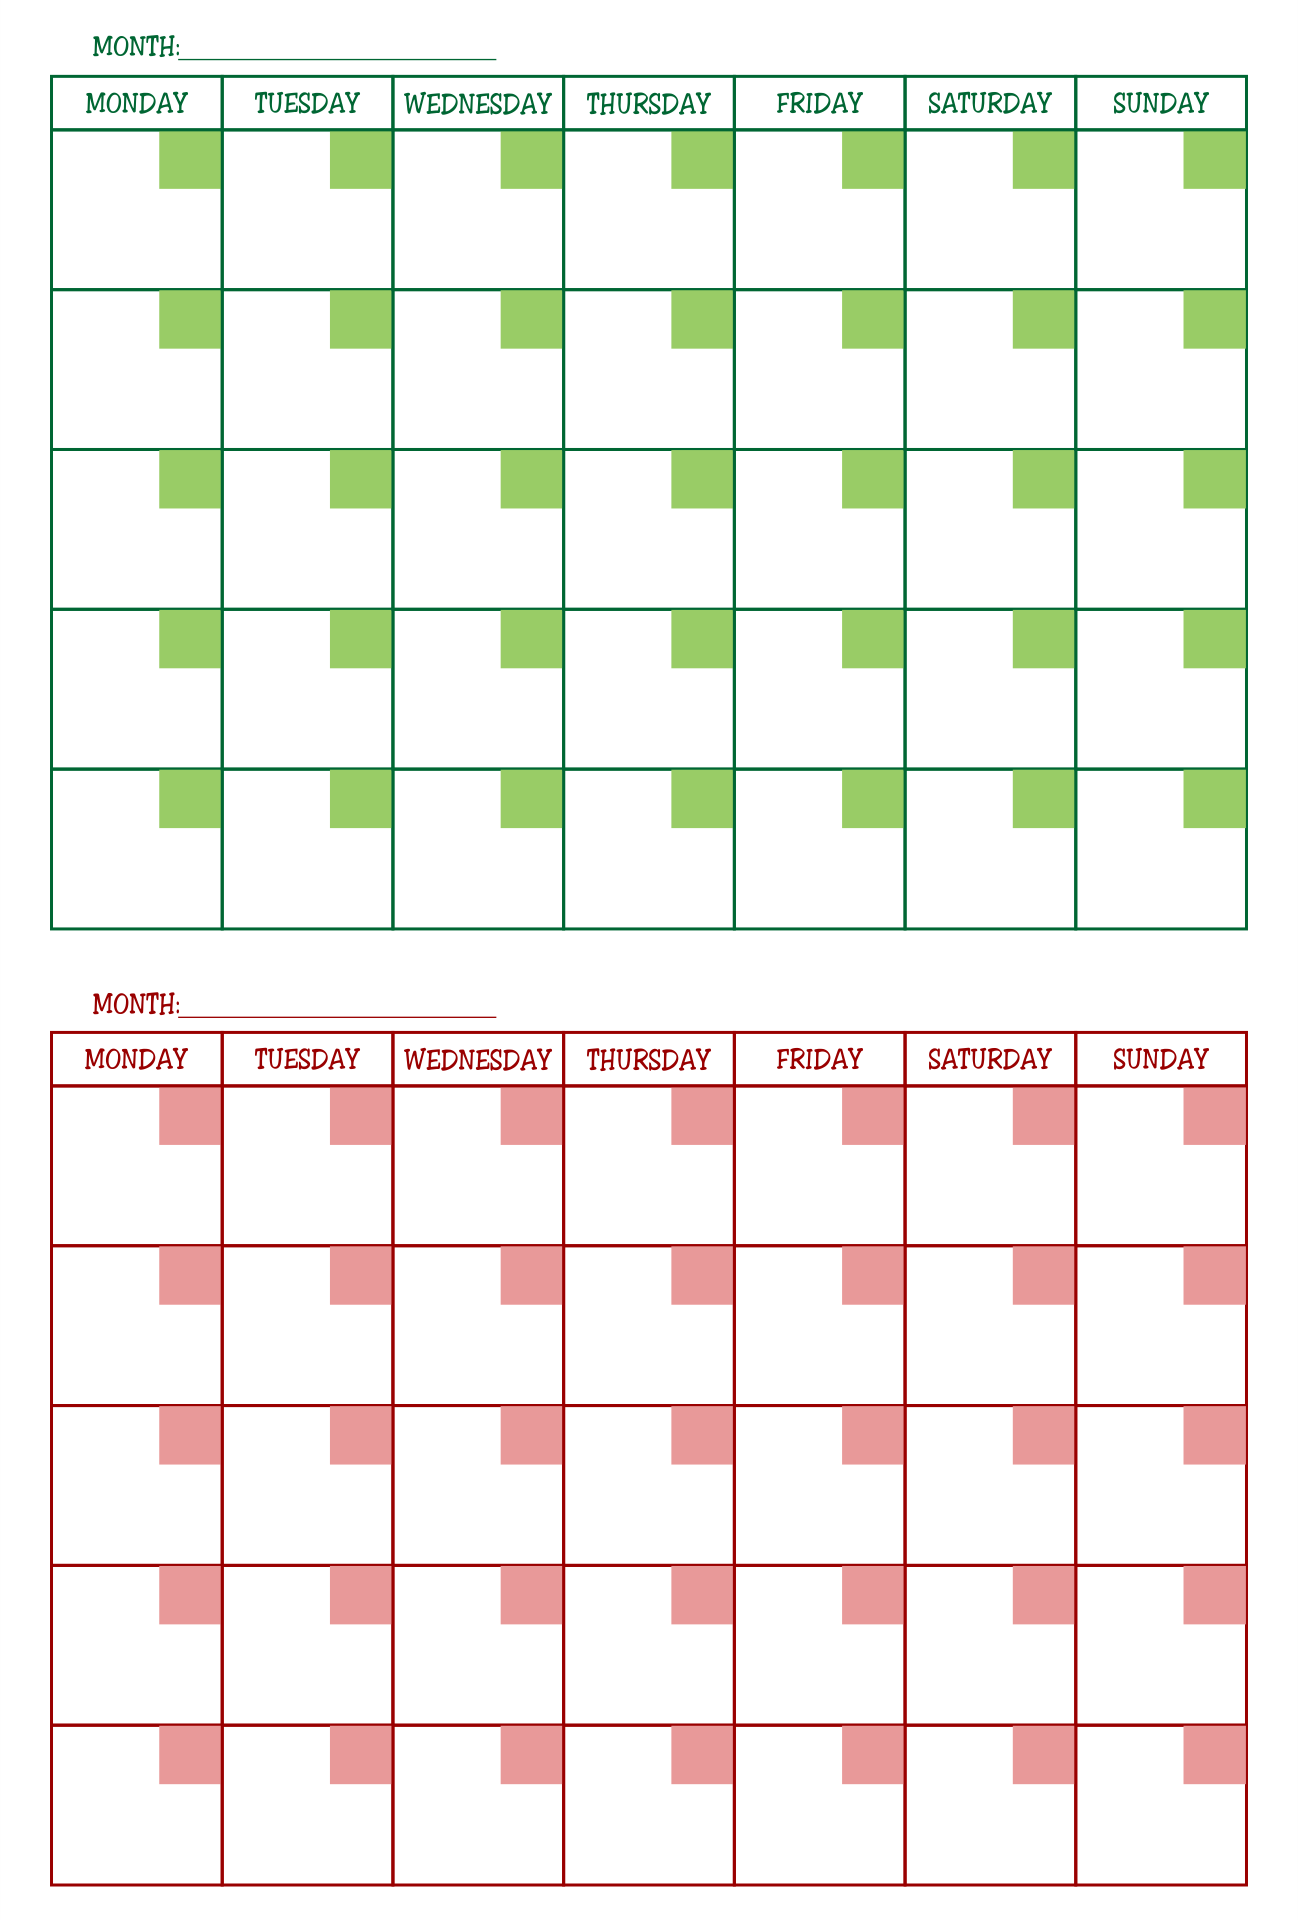 5-best-images-of-two-month-calendar-printable-two-page-monthly-calendar-printable-2-month